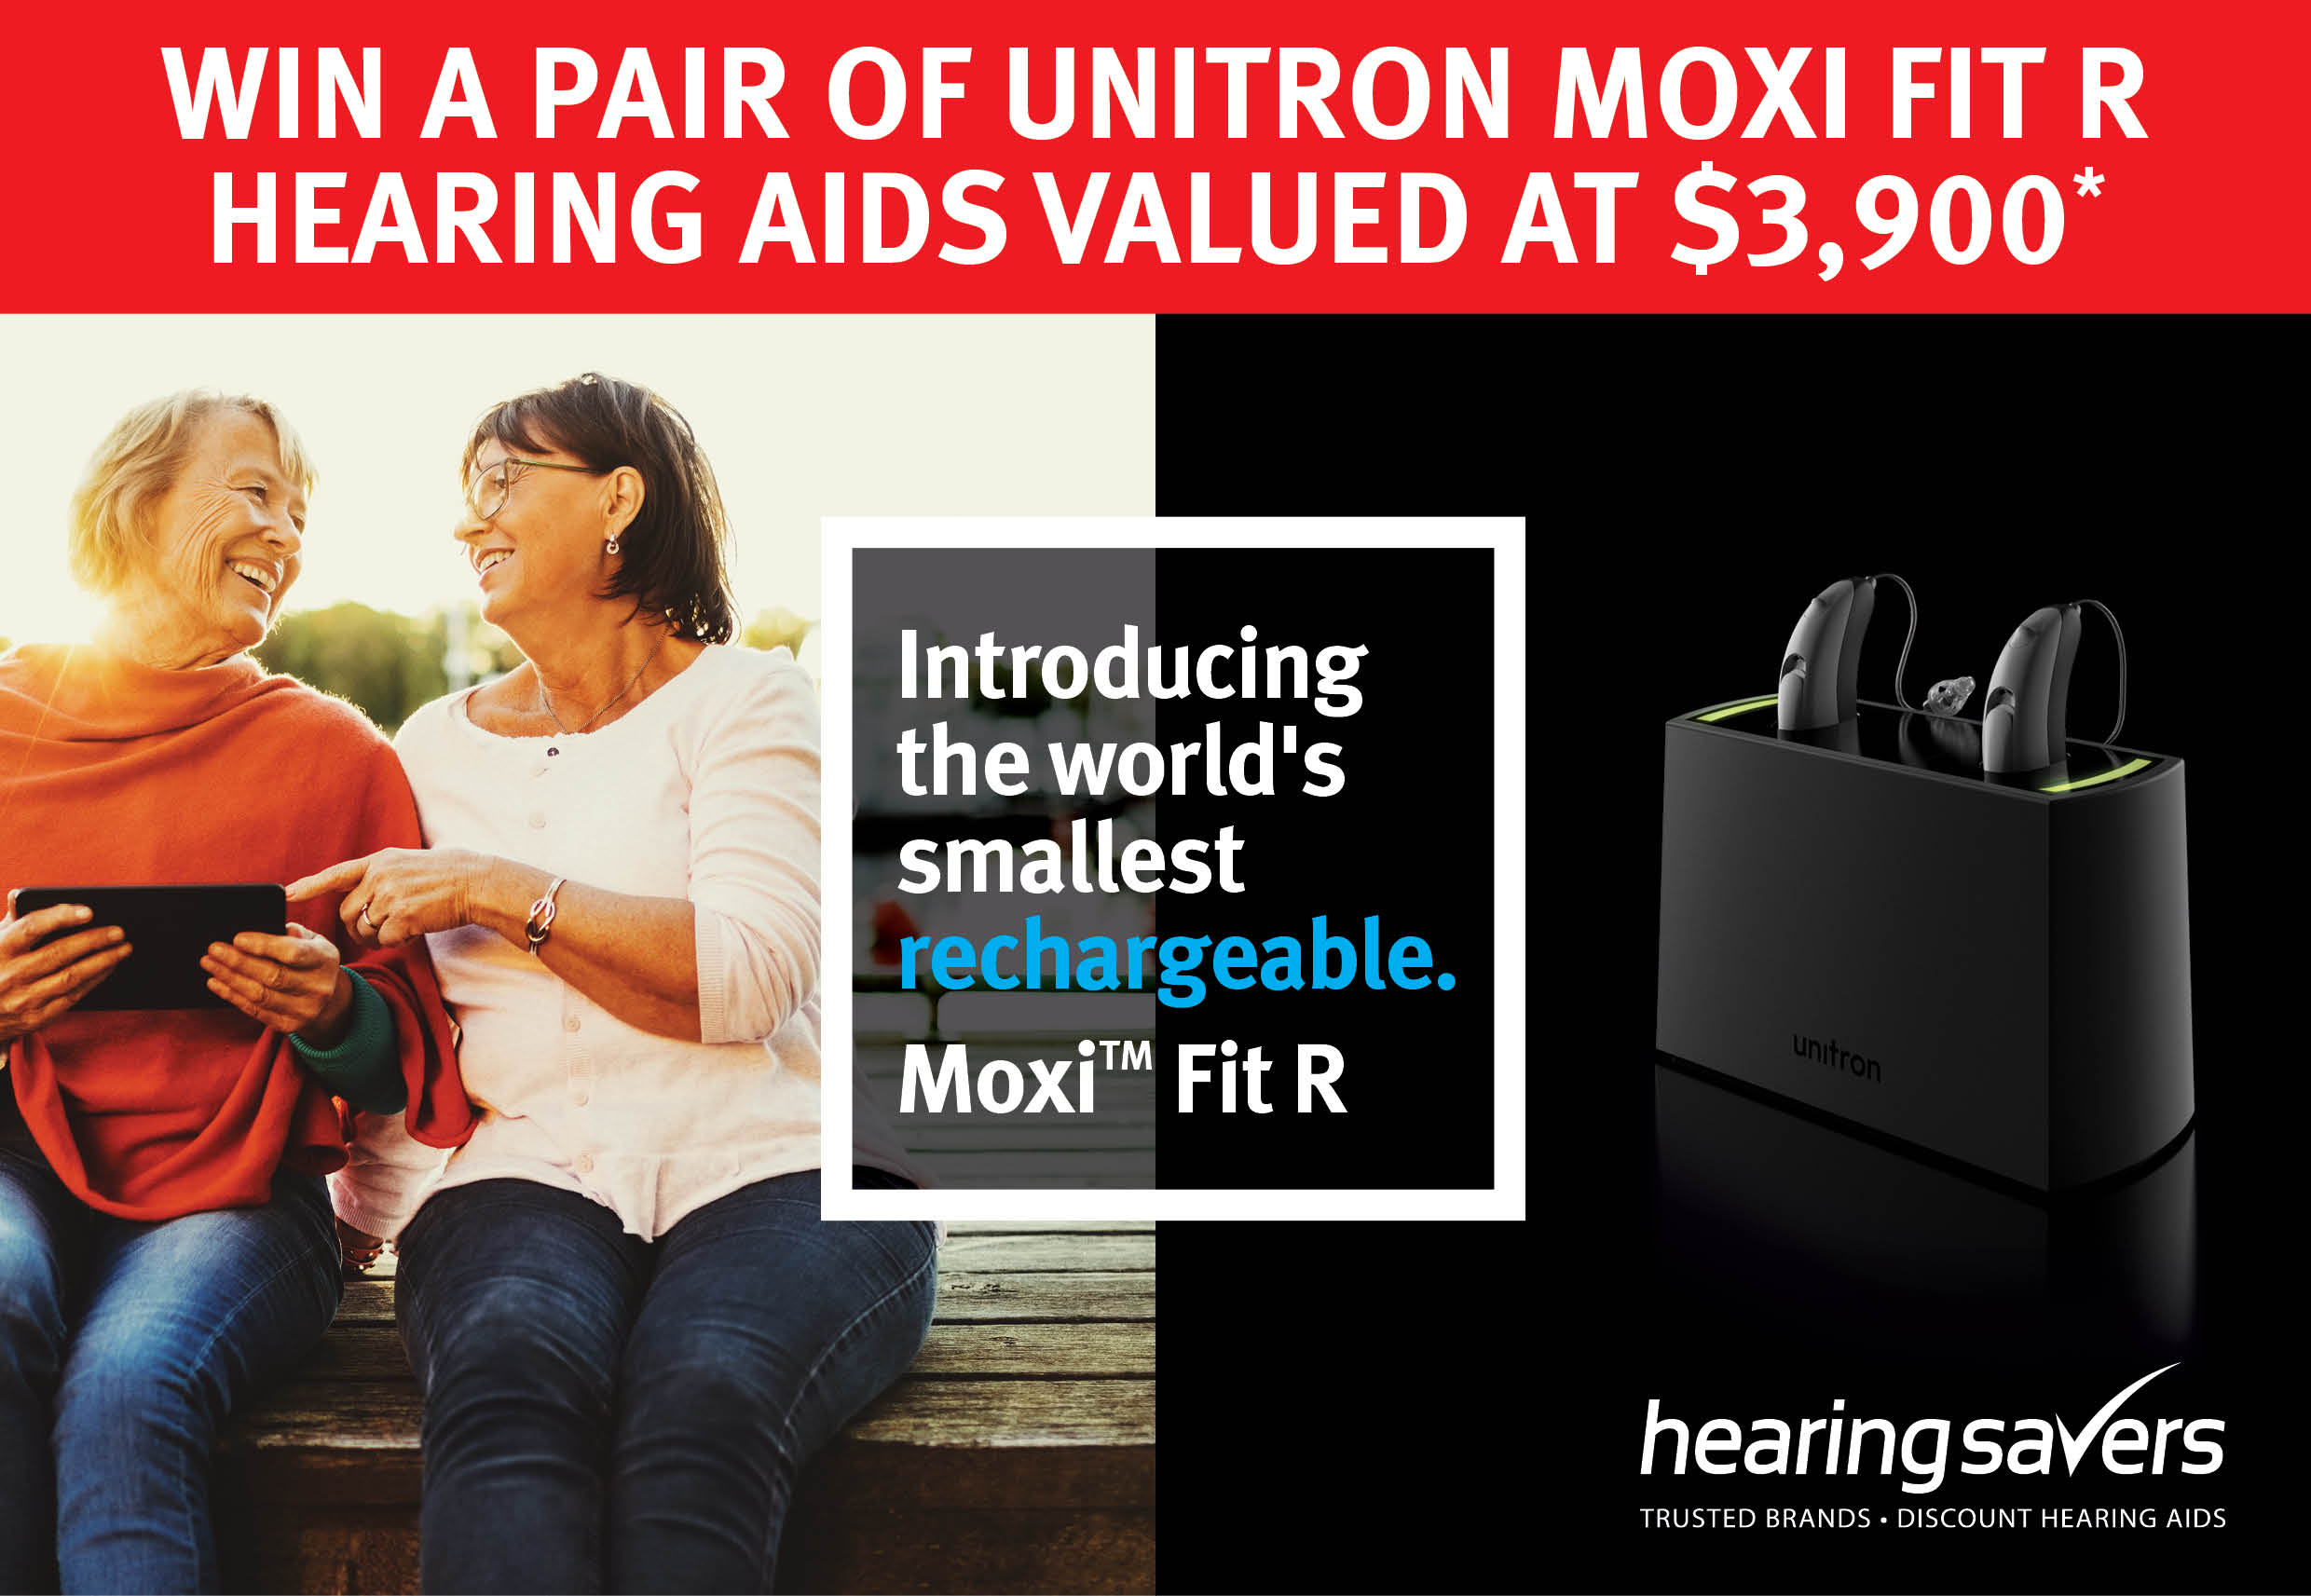 Win a pair of hearing aids valued at $3900